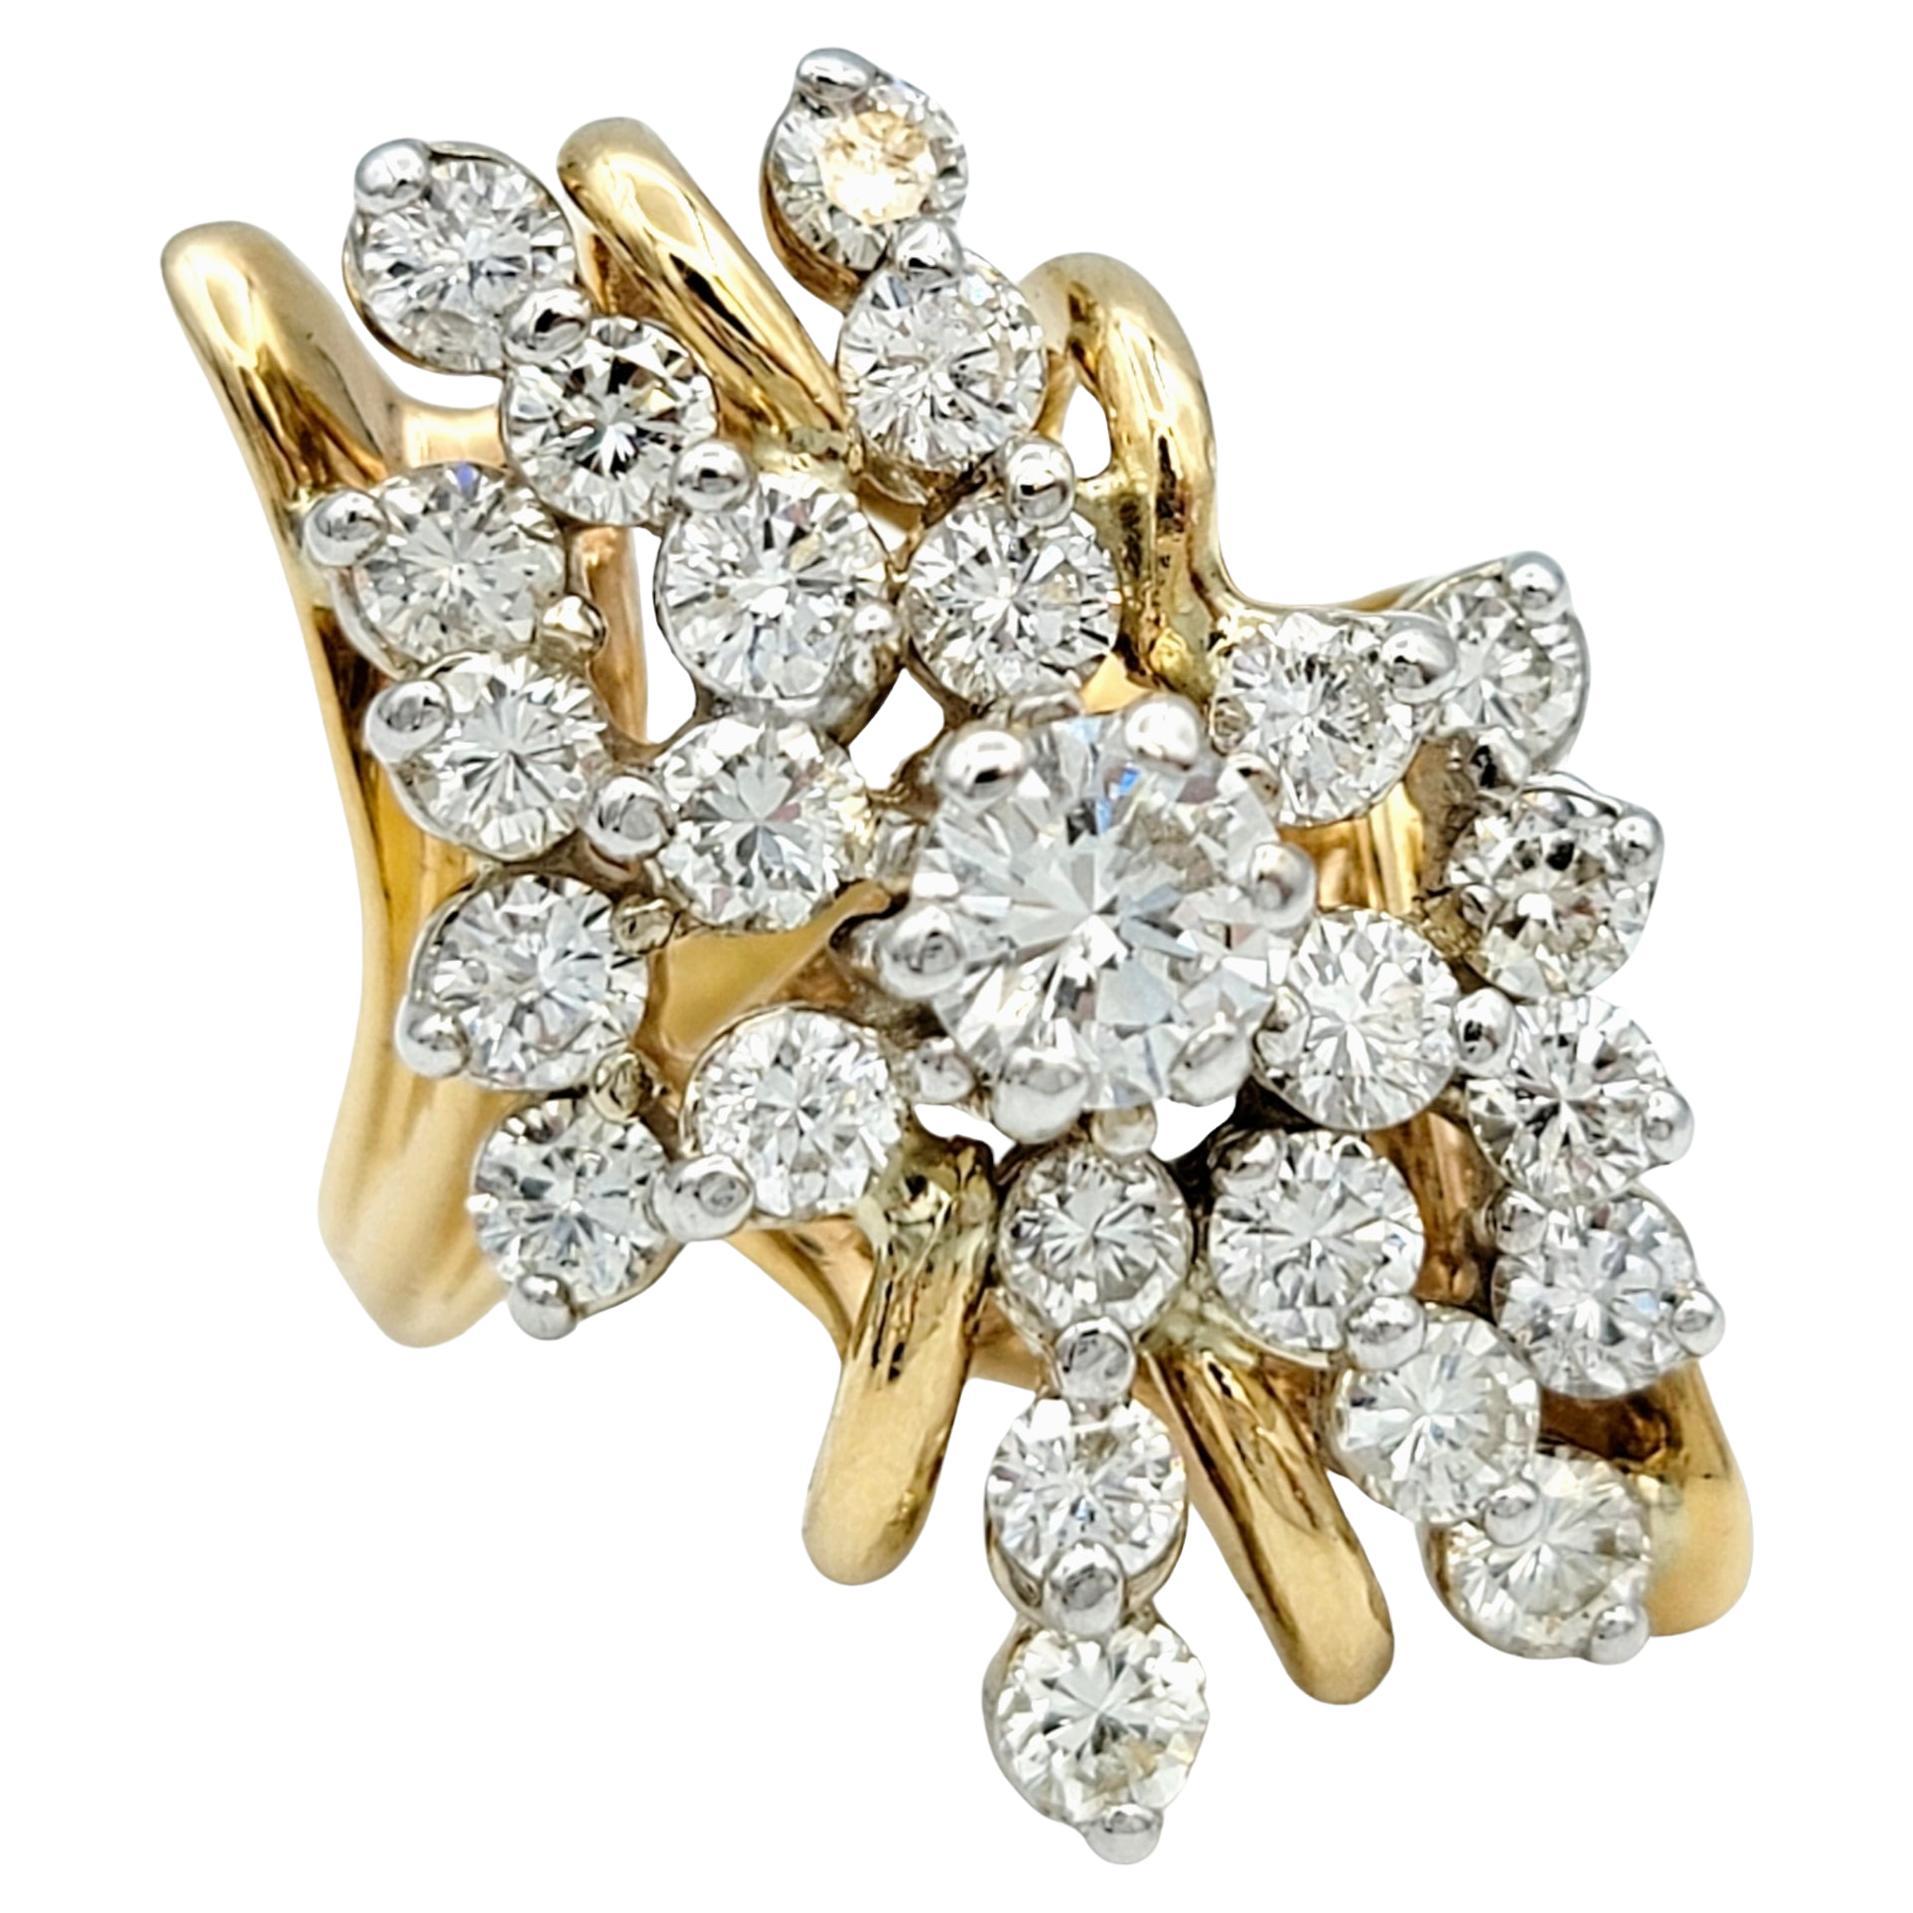 3.01 Carat Total Round Diamond Elongated Cluster Ring in 14 Karat Yellow Gold For Sale 1